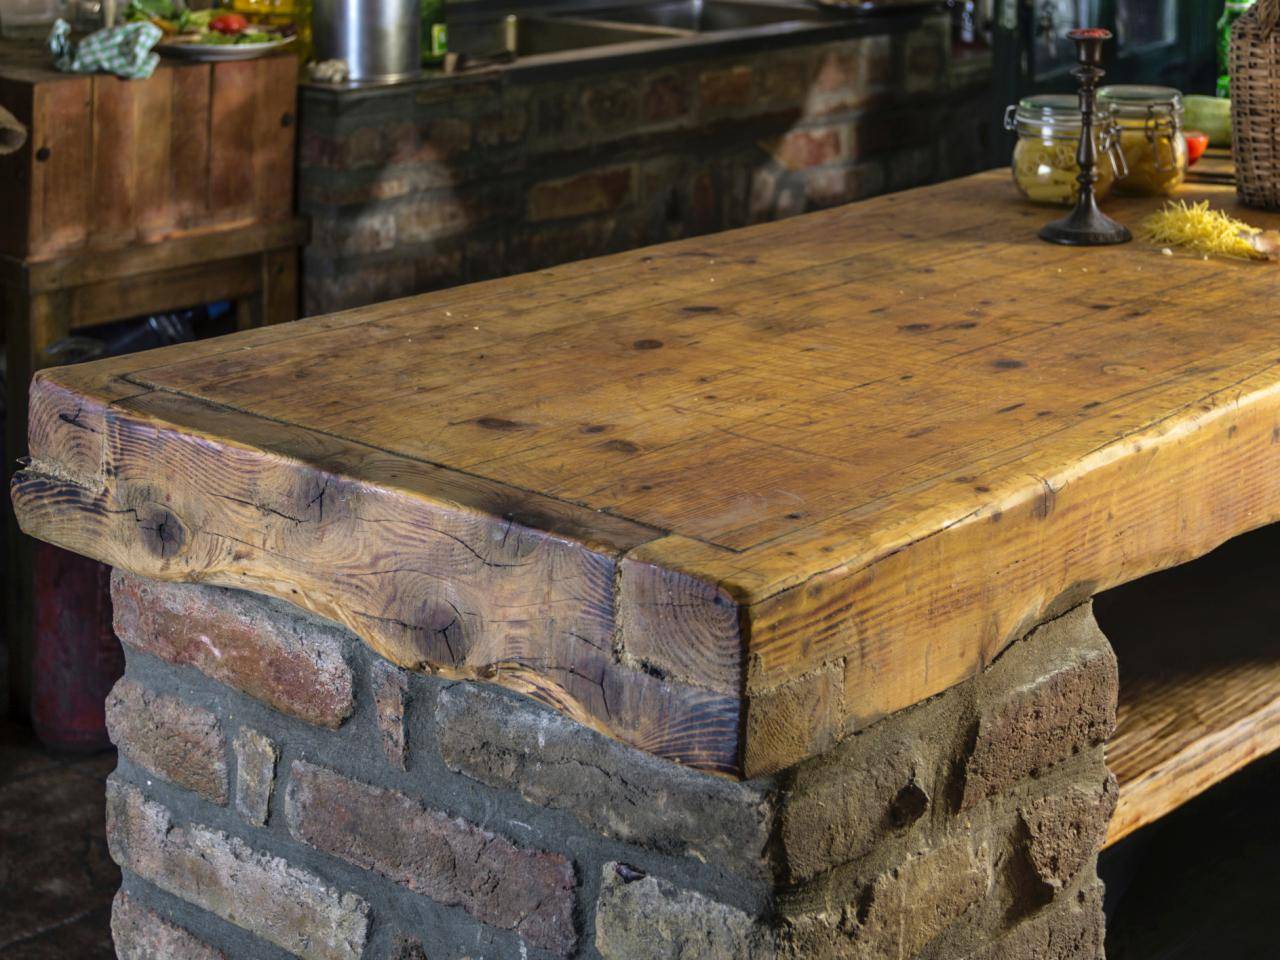 20 Rustic Countertop Ideas to Try for Your Home